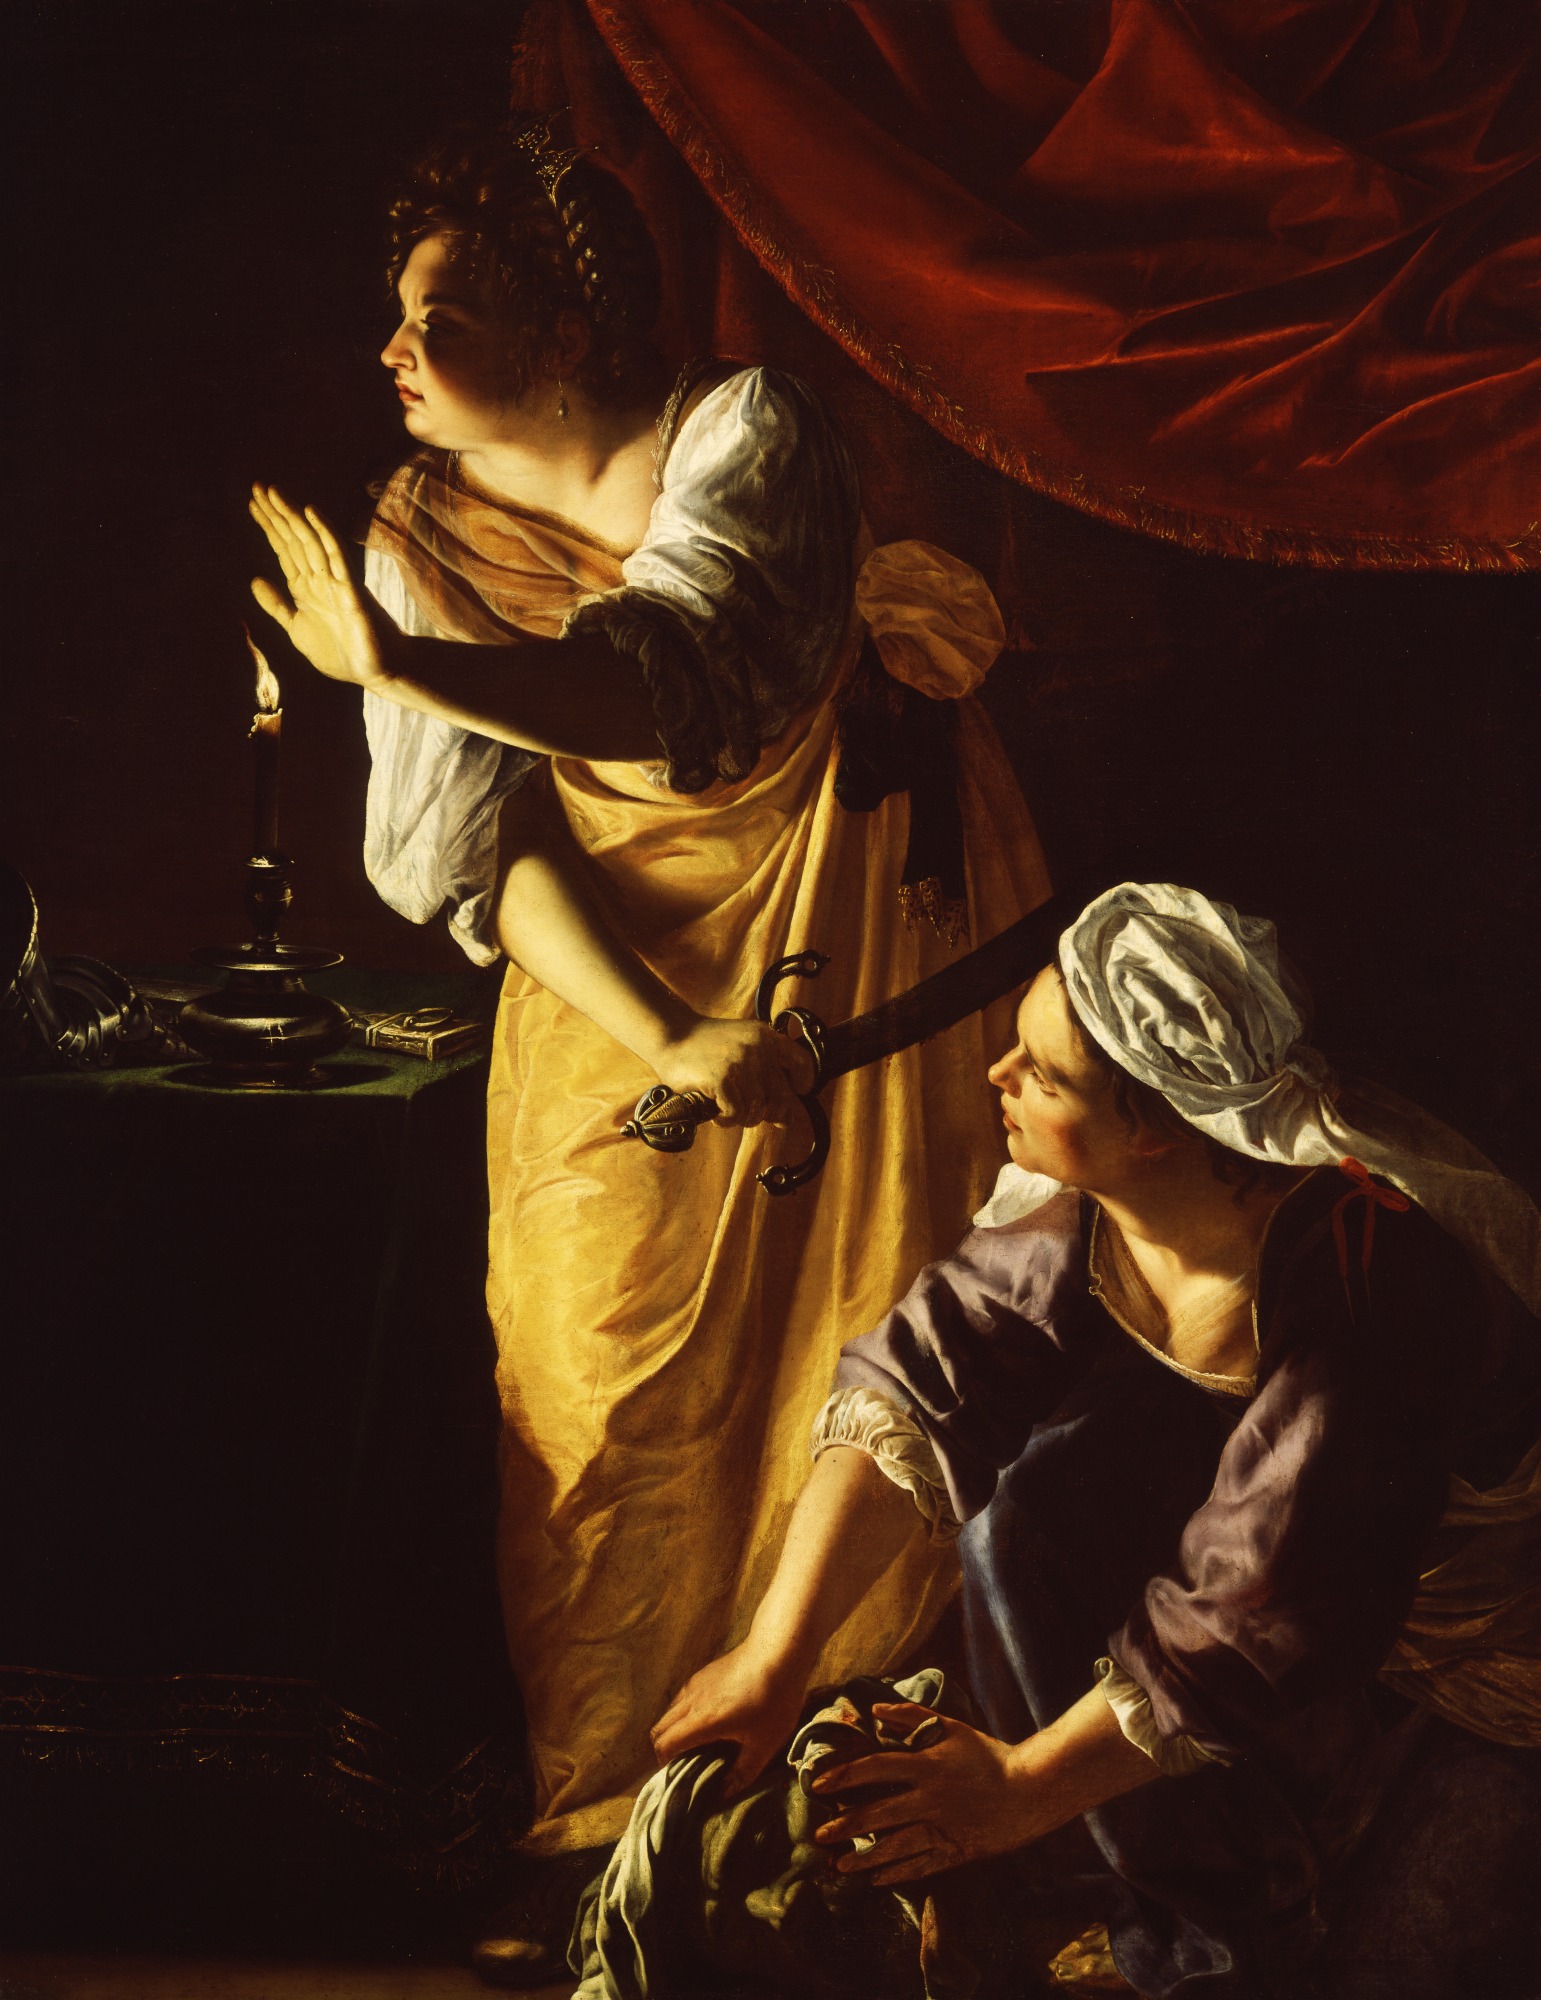 Two women appear in candlelight, their faces partially obscured. The younger woman, in yellow, hold a sword in one hand and holds the other hand up as thought to say “stop.” The older woman crouches down, wearing a purple dress and a white head covering. She uses a cloth to wrap the bloodied head of a man, which has been violently separated from its body. A red velvet cloth is draped behind them, heightening the drama of the moment. 